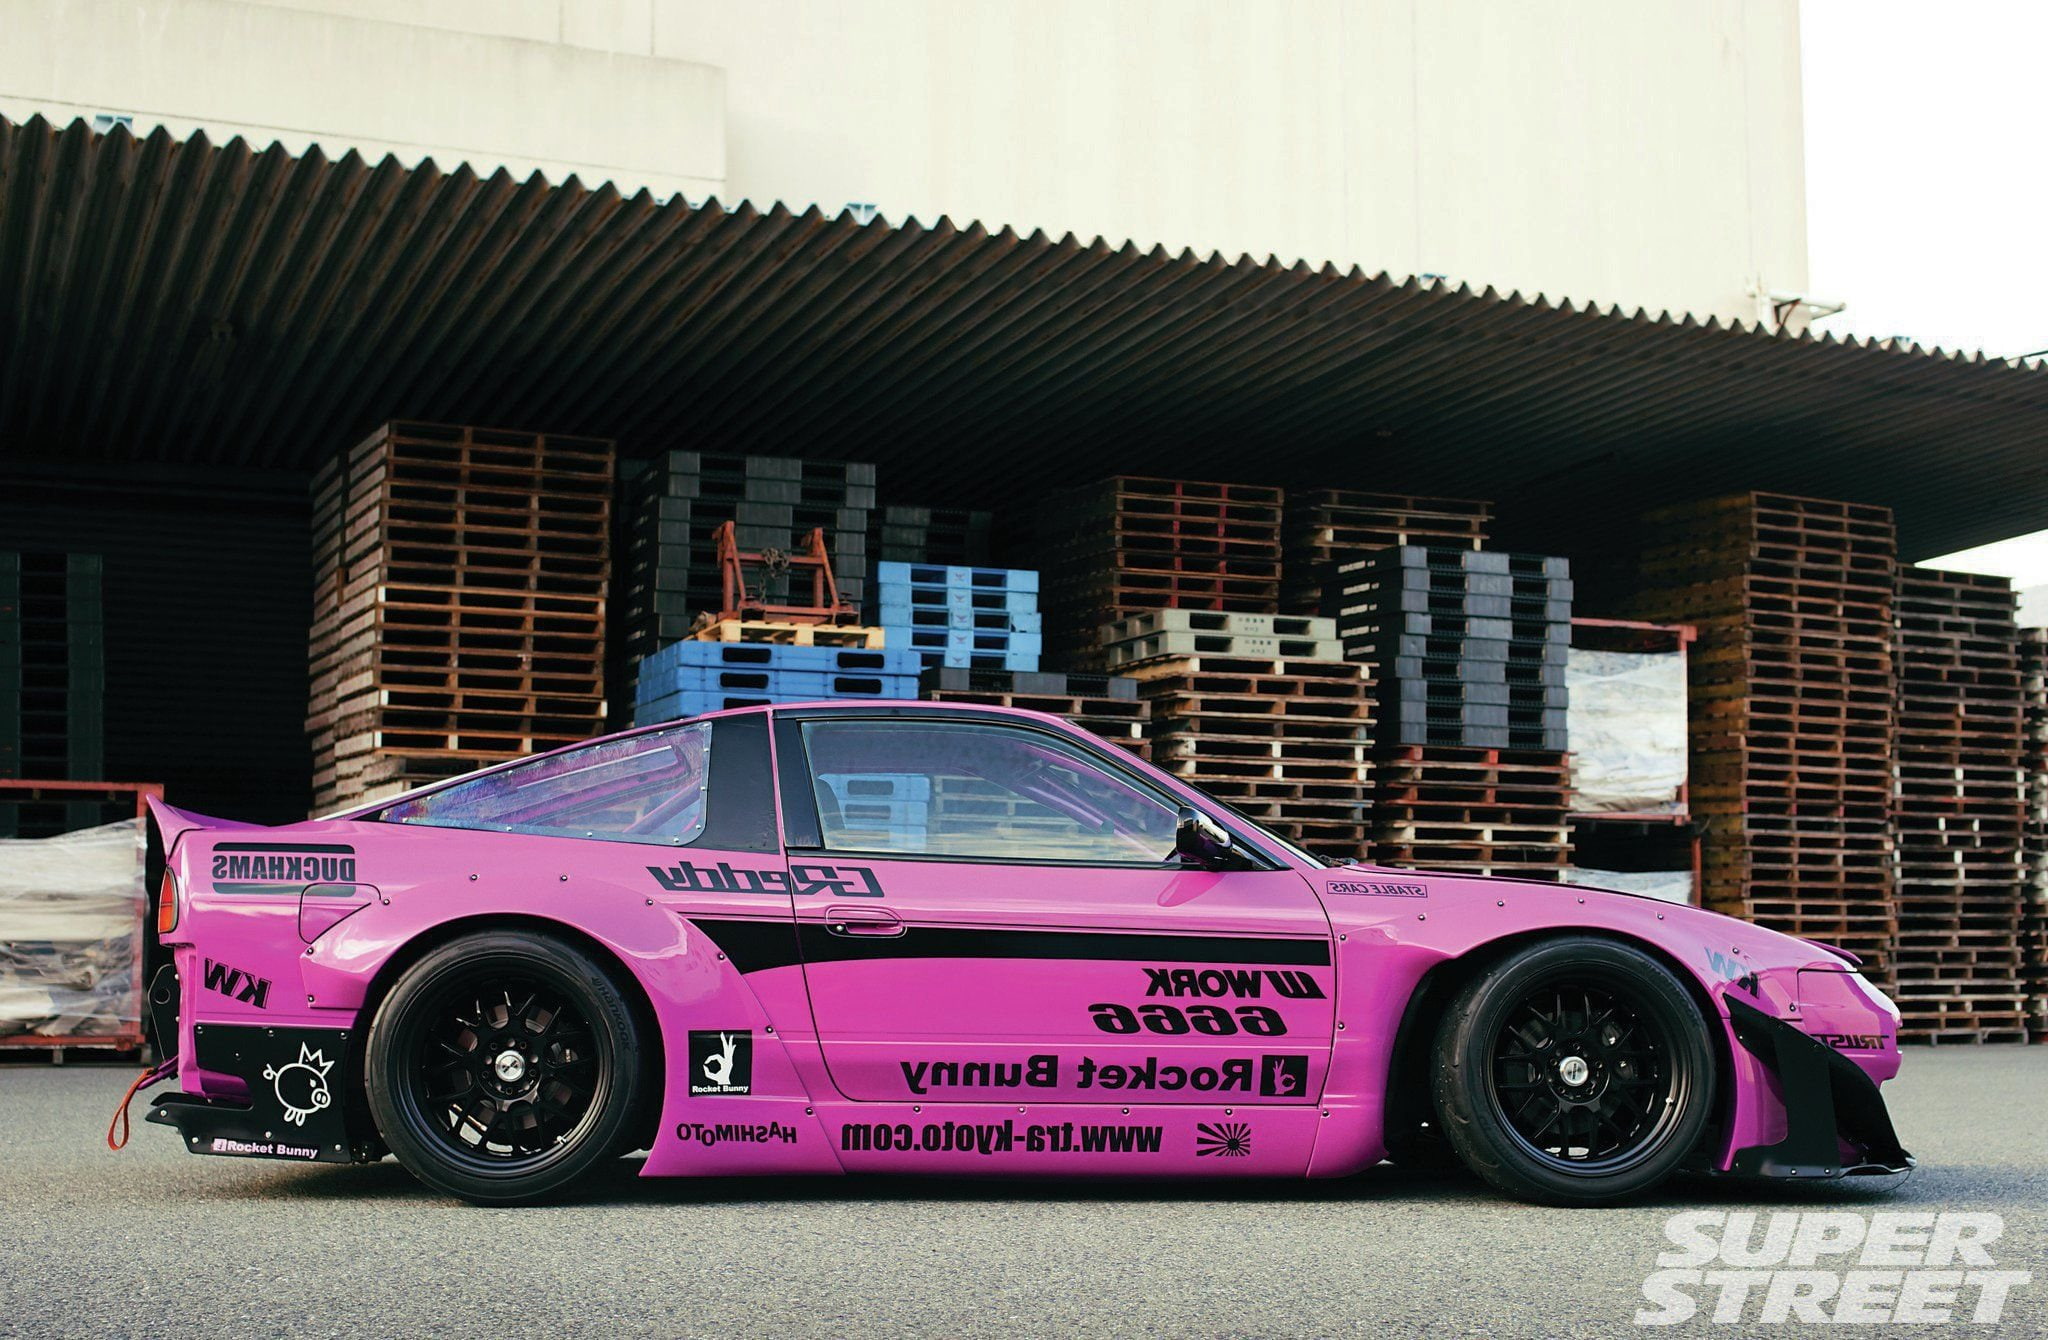 180sx, cars, coupe, japan, nissan, tuning